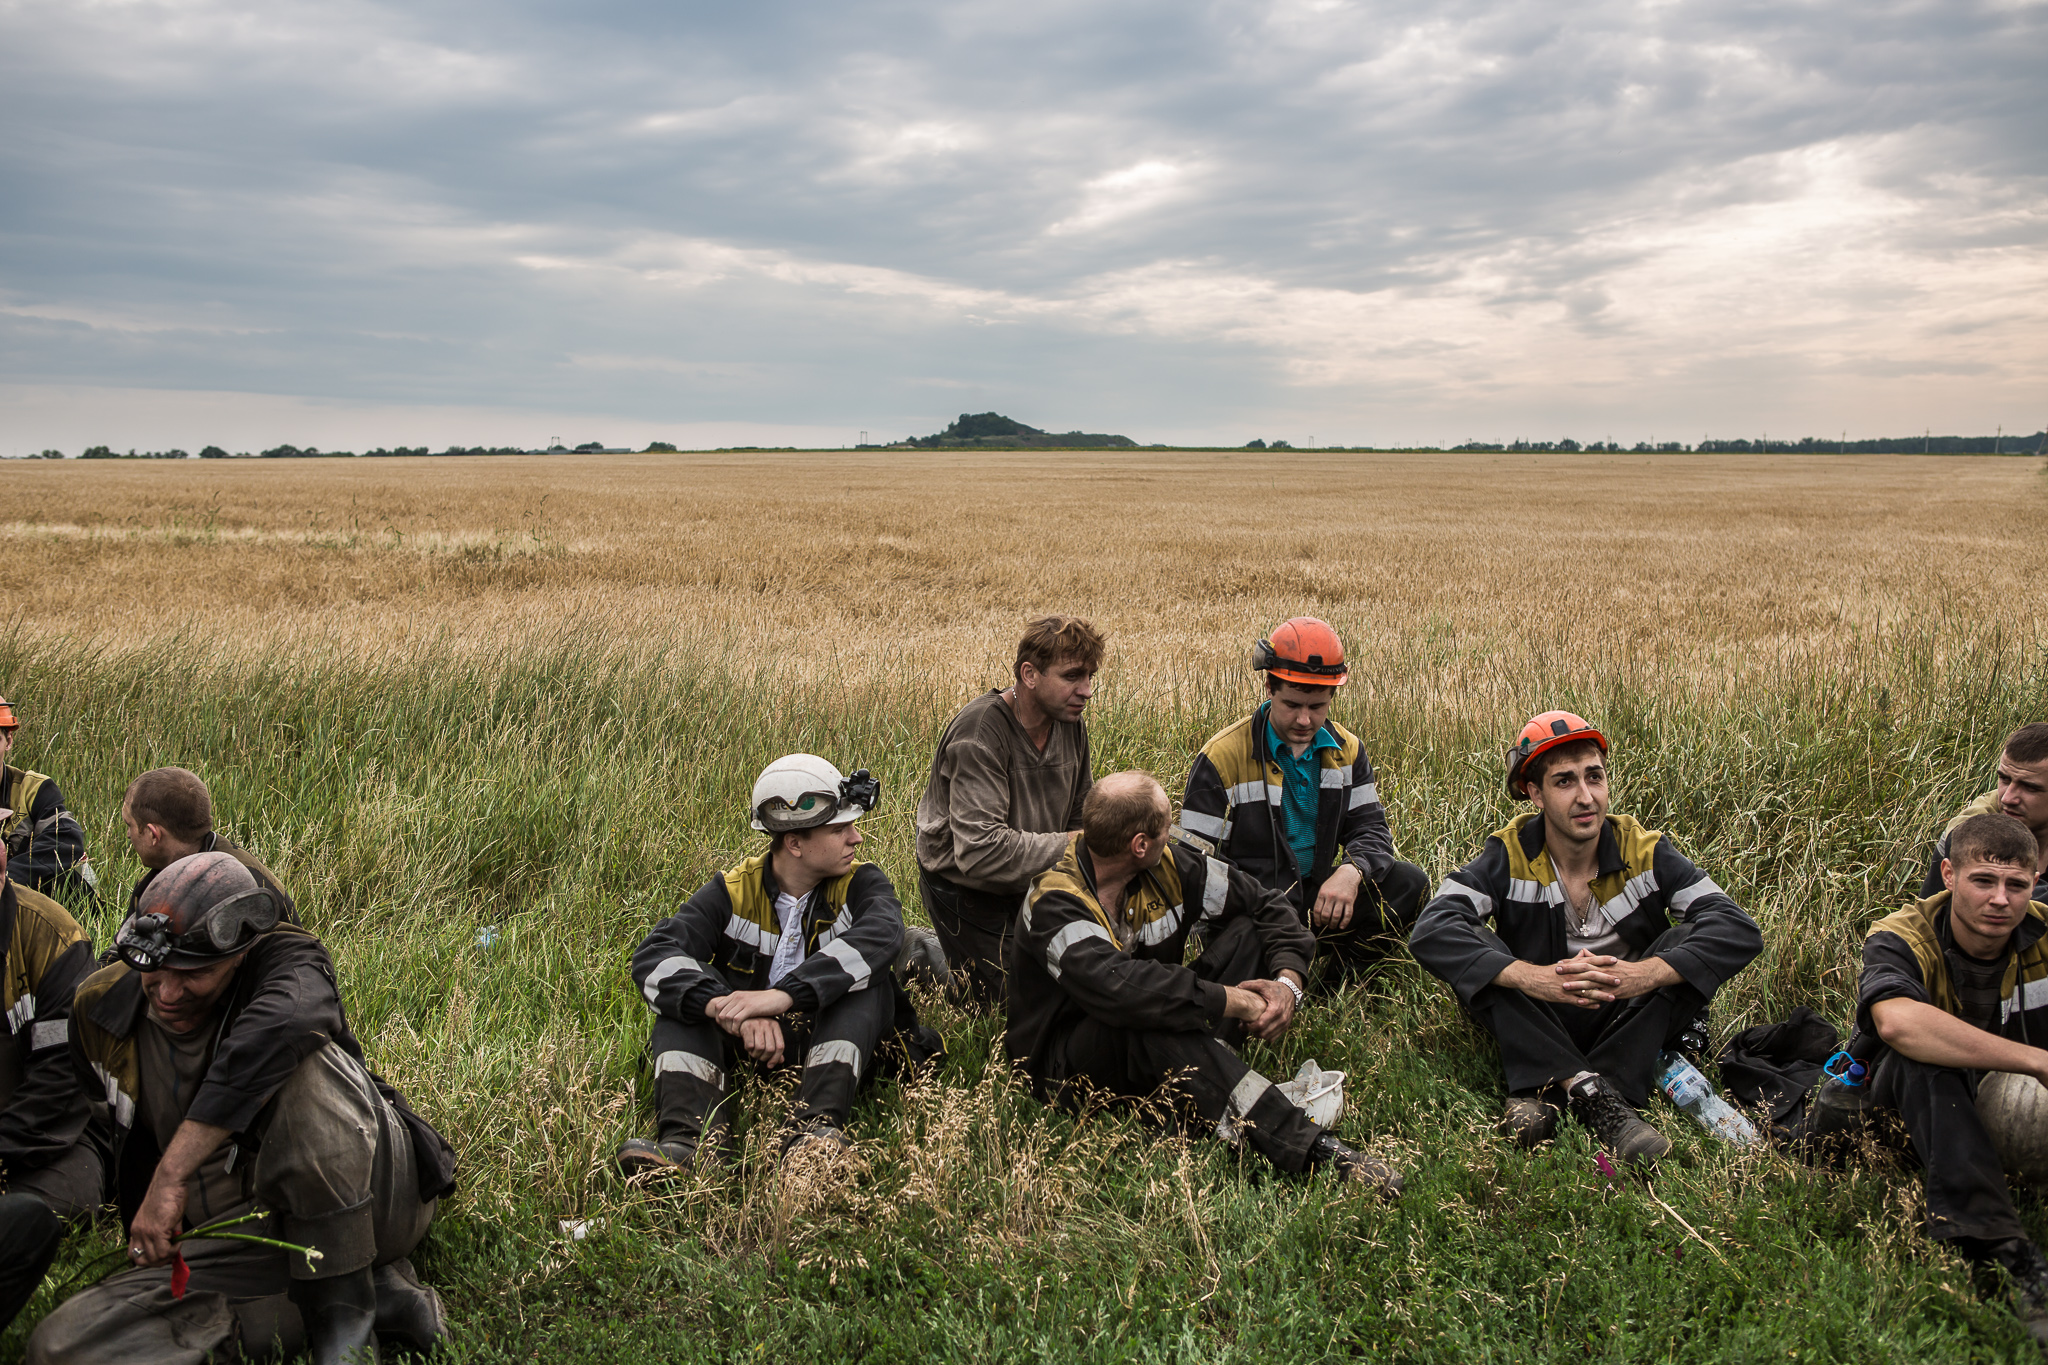  A group of coal miners takes a break after searching fields looking for remnants of Malaysia Airlines flight MH 17 on July 19, 2014 in Grabovo, Ukraine. Malaysia Airlines flight MH17 was travelling from Amsterdam to Kuala Lumpur when it crashed kill